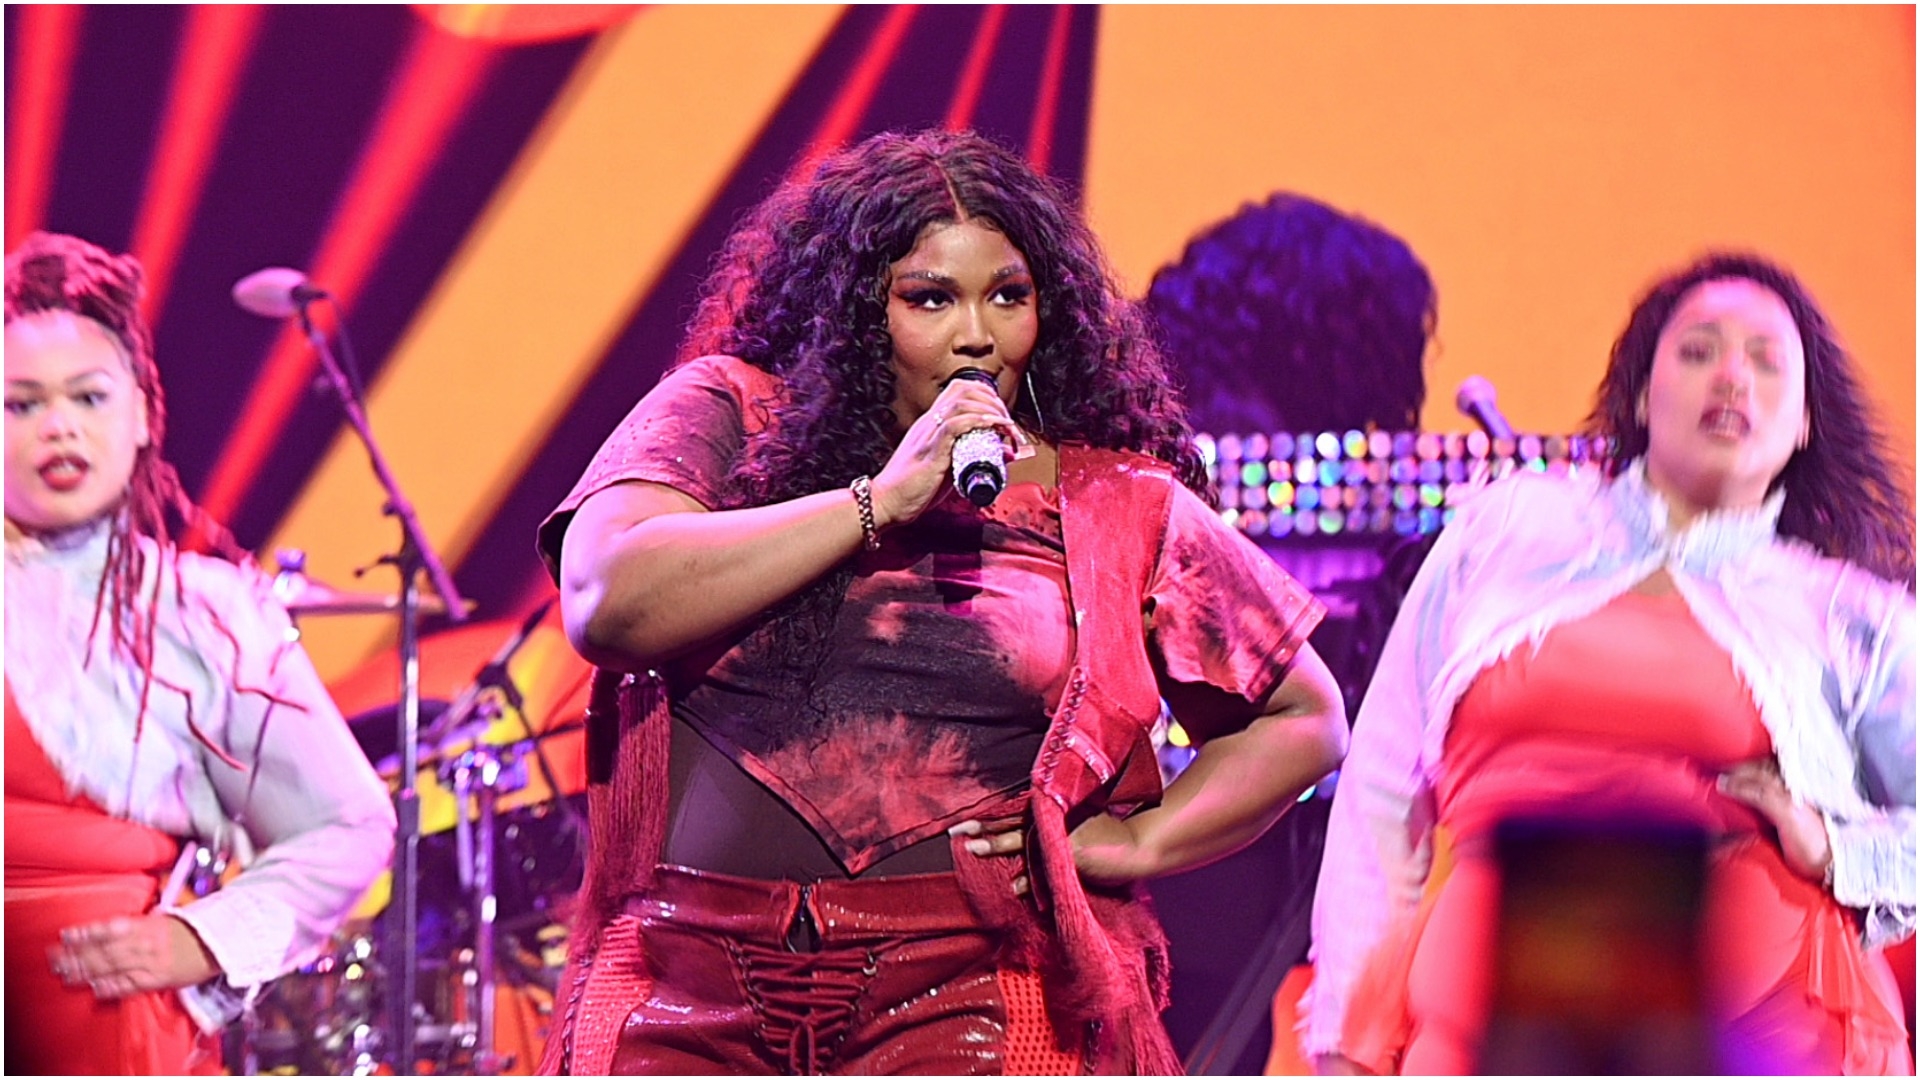 Lizzo removes “harmful” word from her new song “Grrrls” following ableism criticism